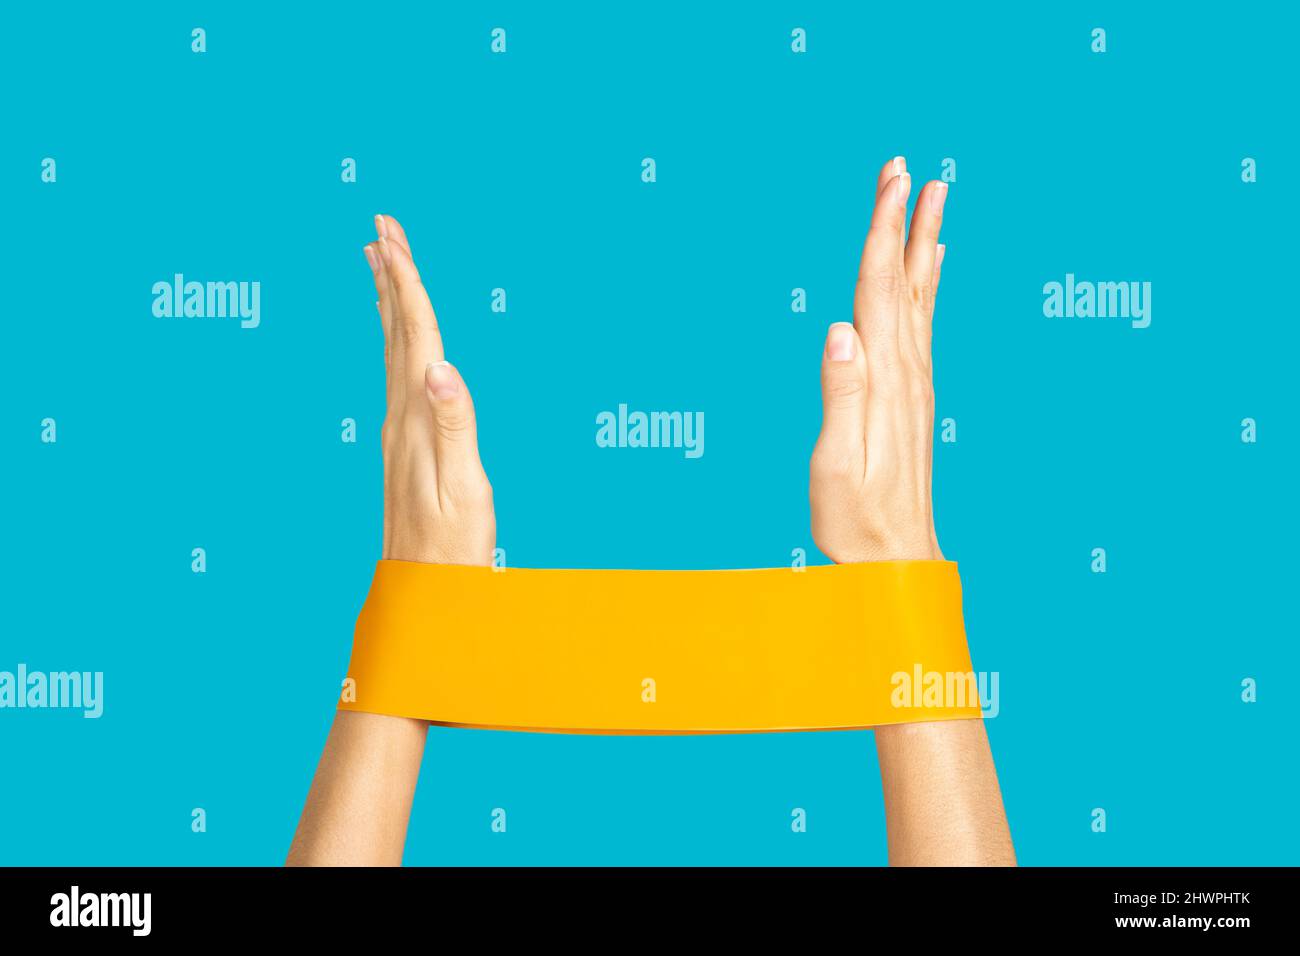 Closeup of isolated hands exercising with orange resistance band on blue background. Doing physical activities to keep feet. Getting fit at home by Stock Photo